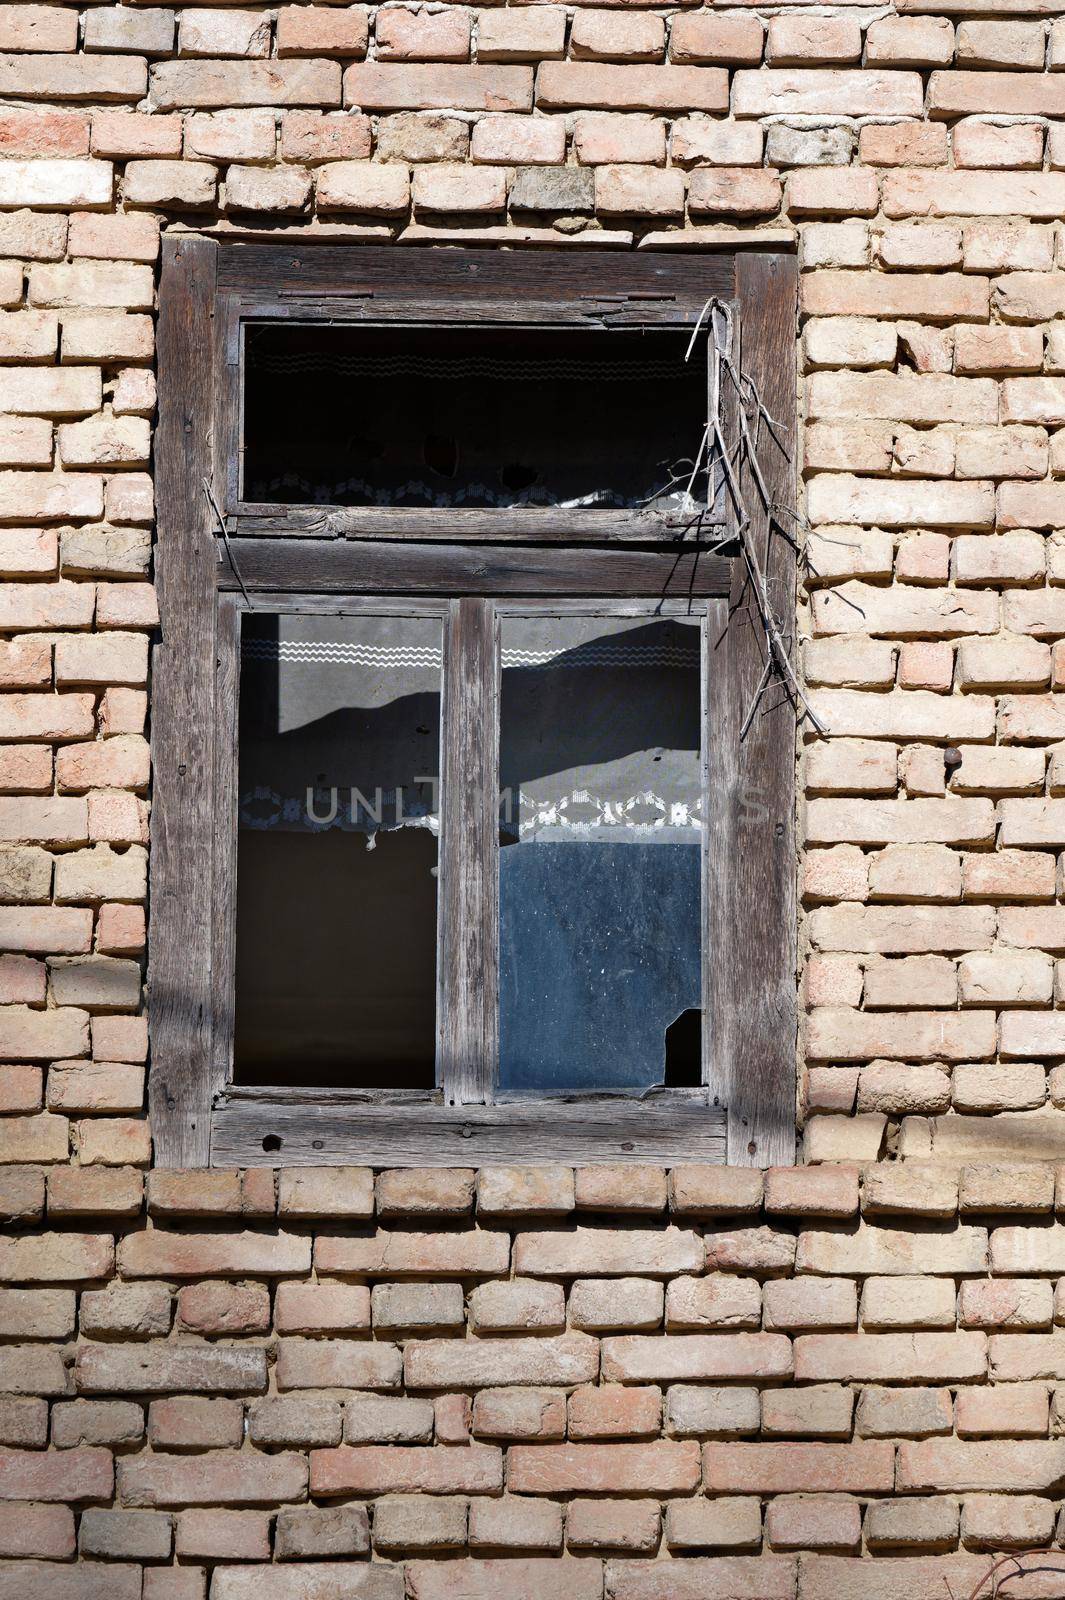 Detail of an old abandoned house with broken window panes, with a brick wall.